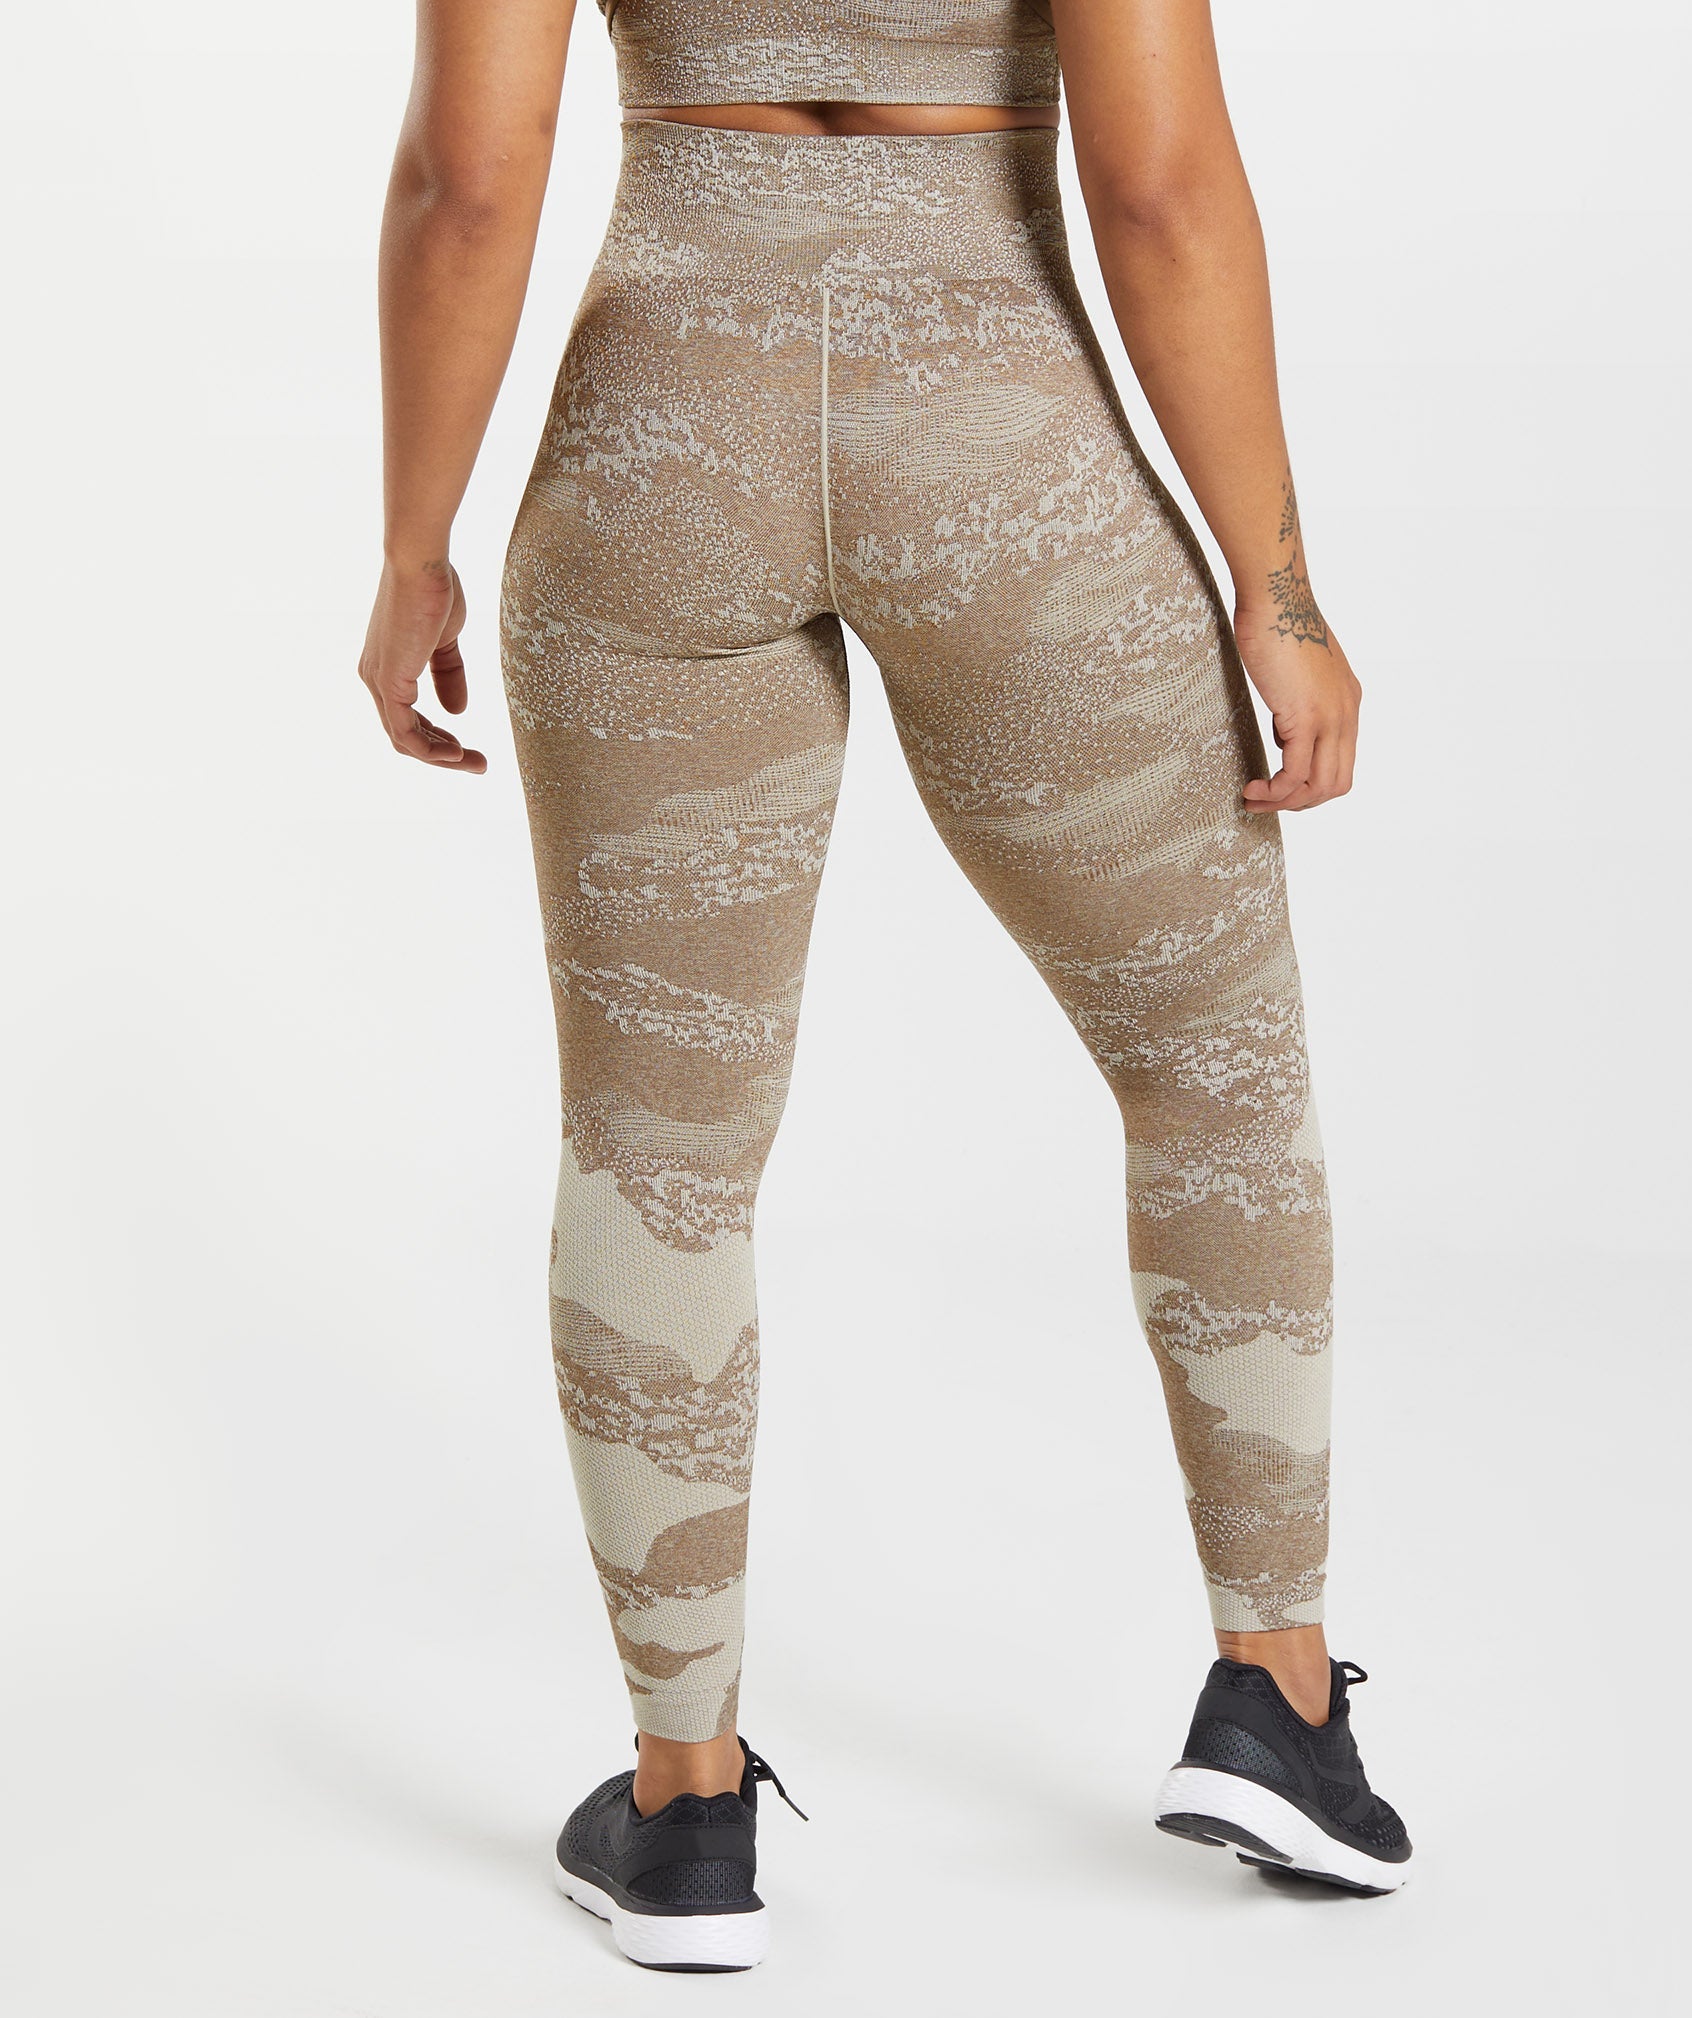 Gymshark ‼️ Adapt Camo Seamless Leggings‼️ Size M - $50 (16% Off Retail) -  From Layna